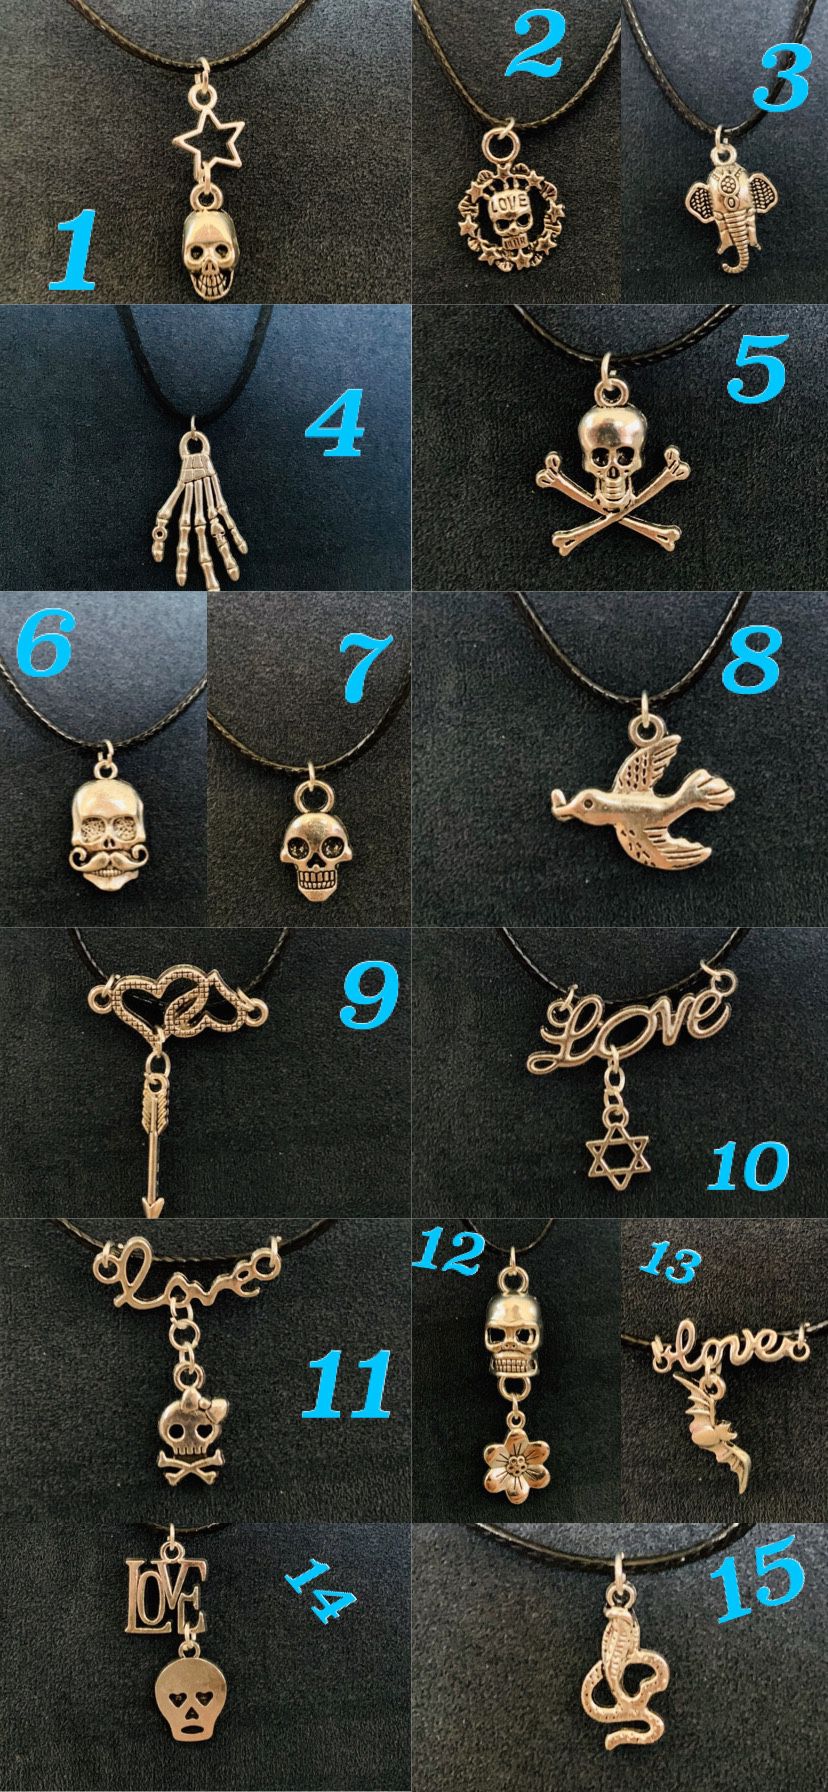 Beautiful Skull necklaces (BUY 5 get 1 FREE)